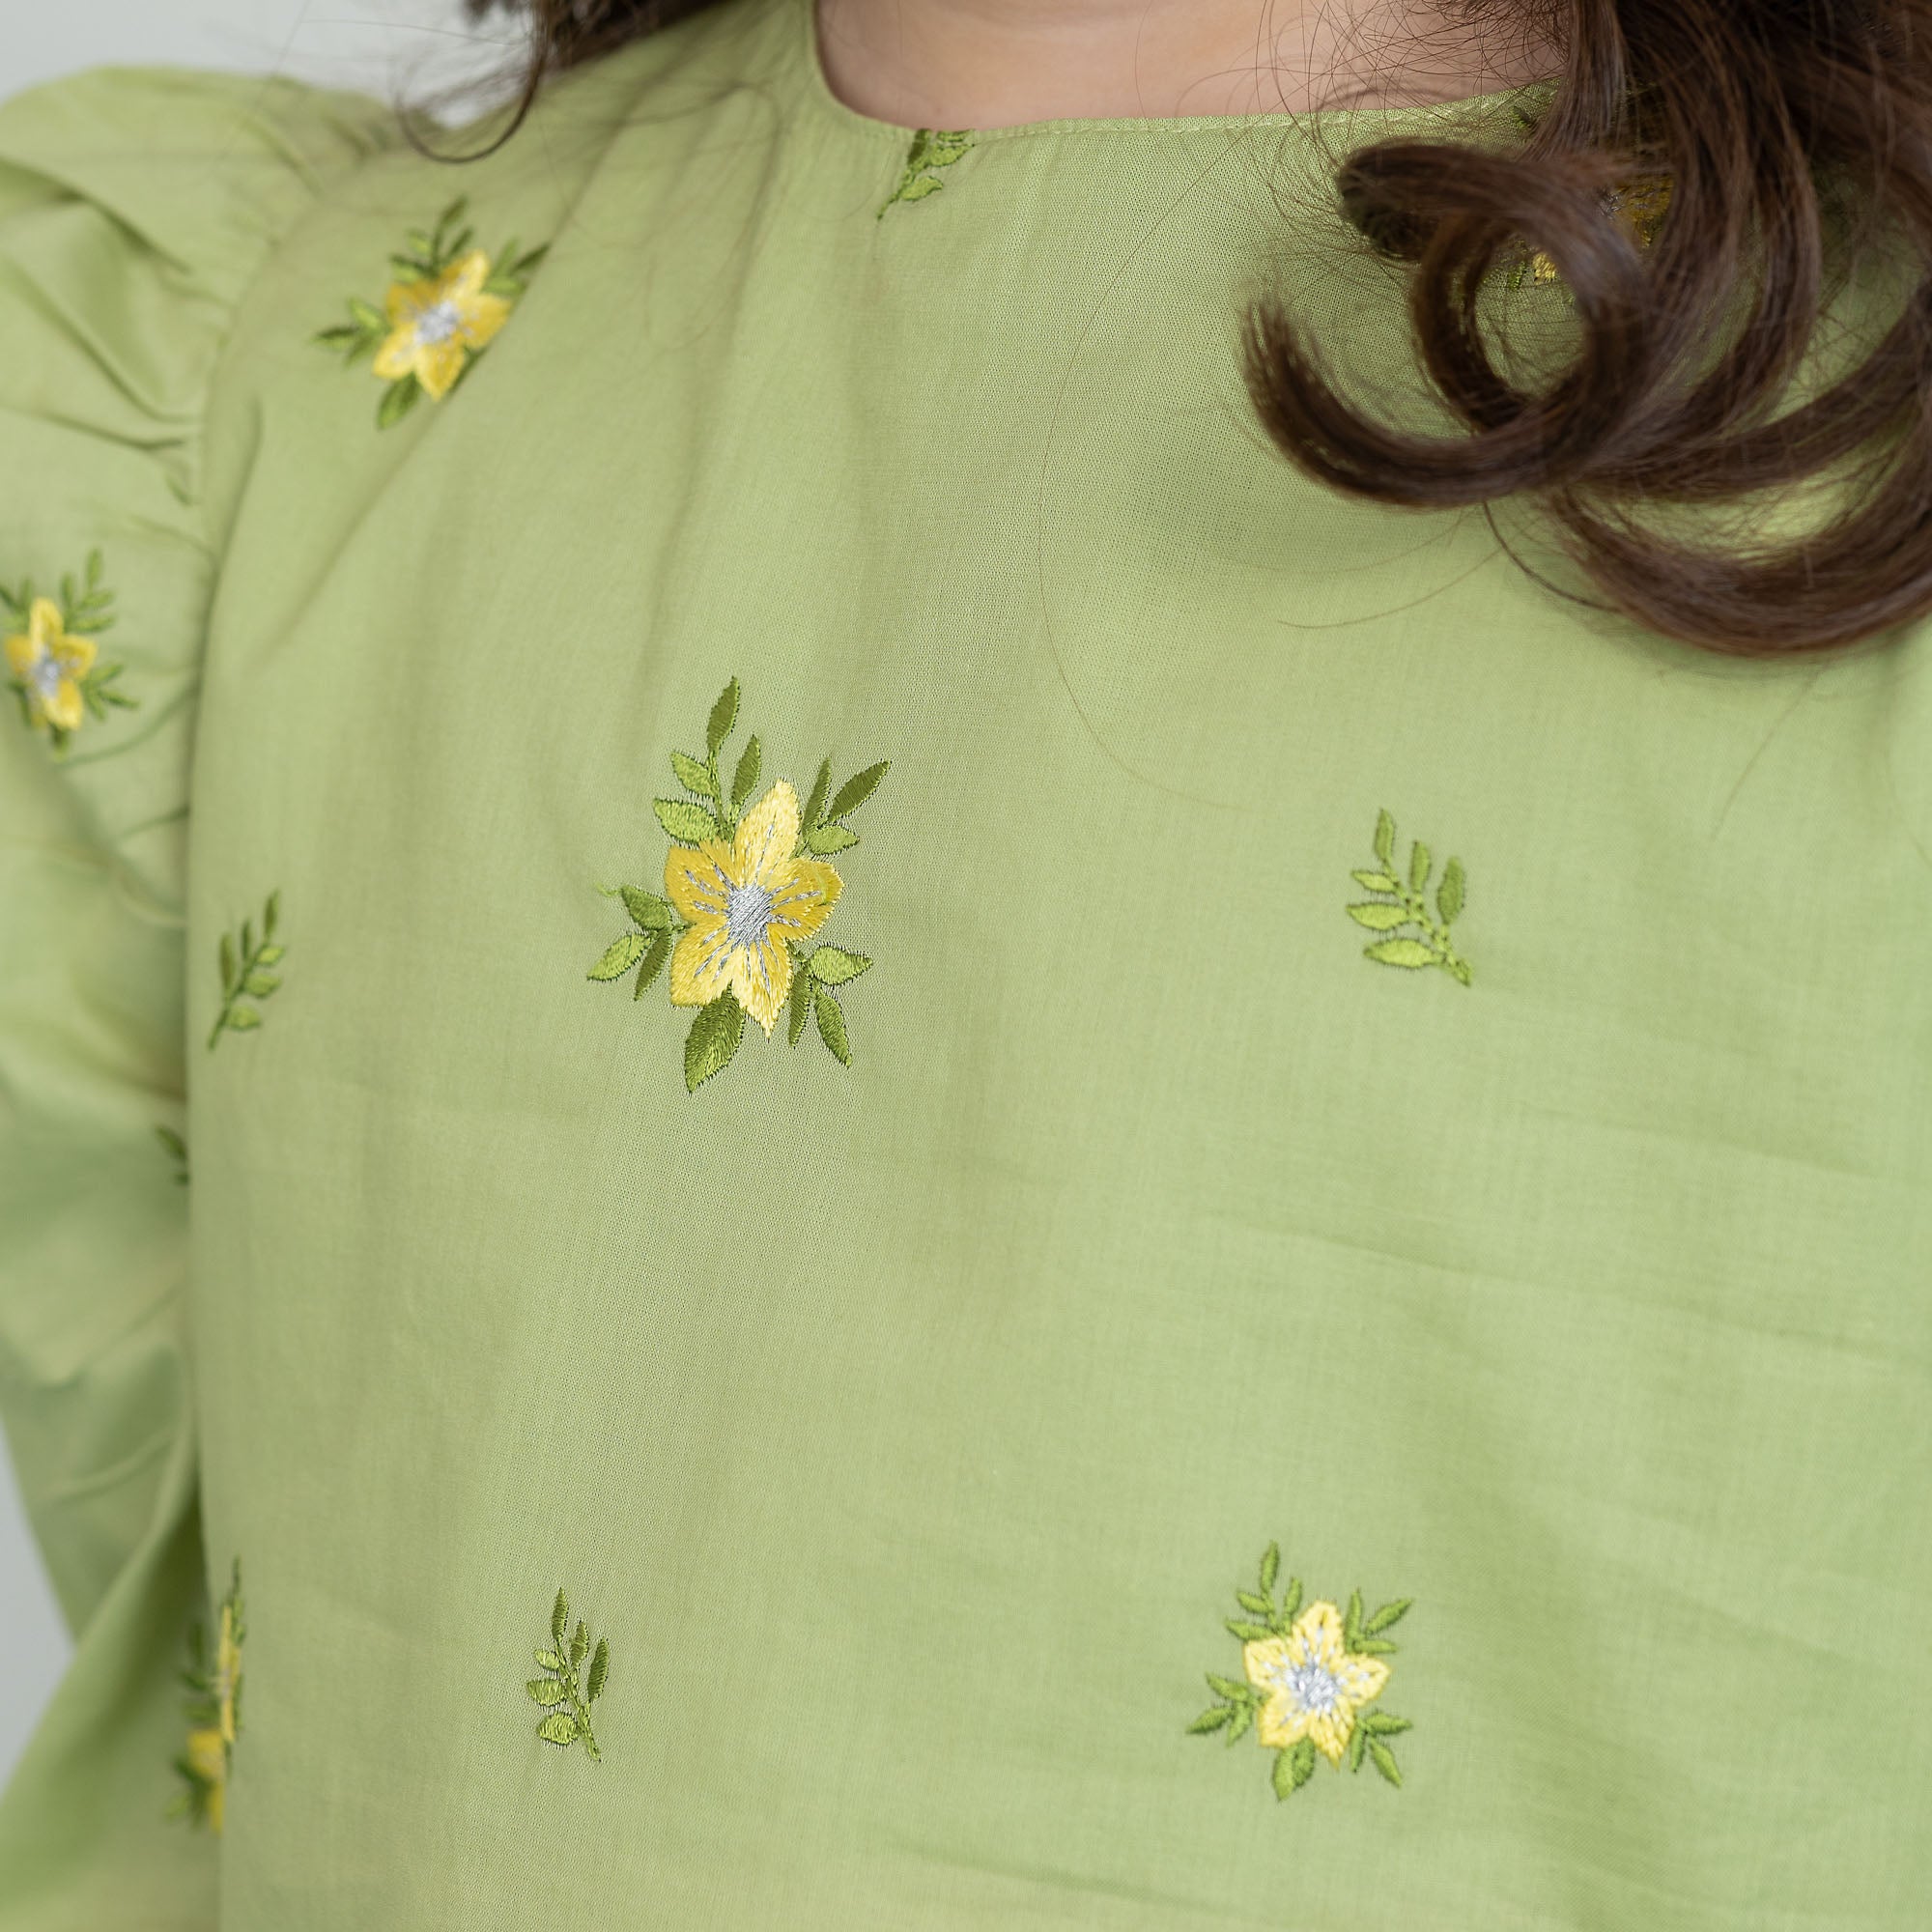 Endue Green Embroidered Suit